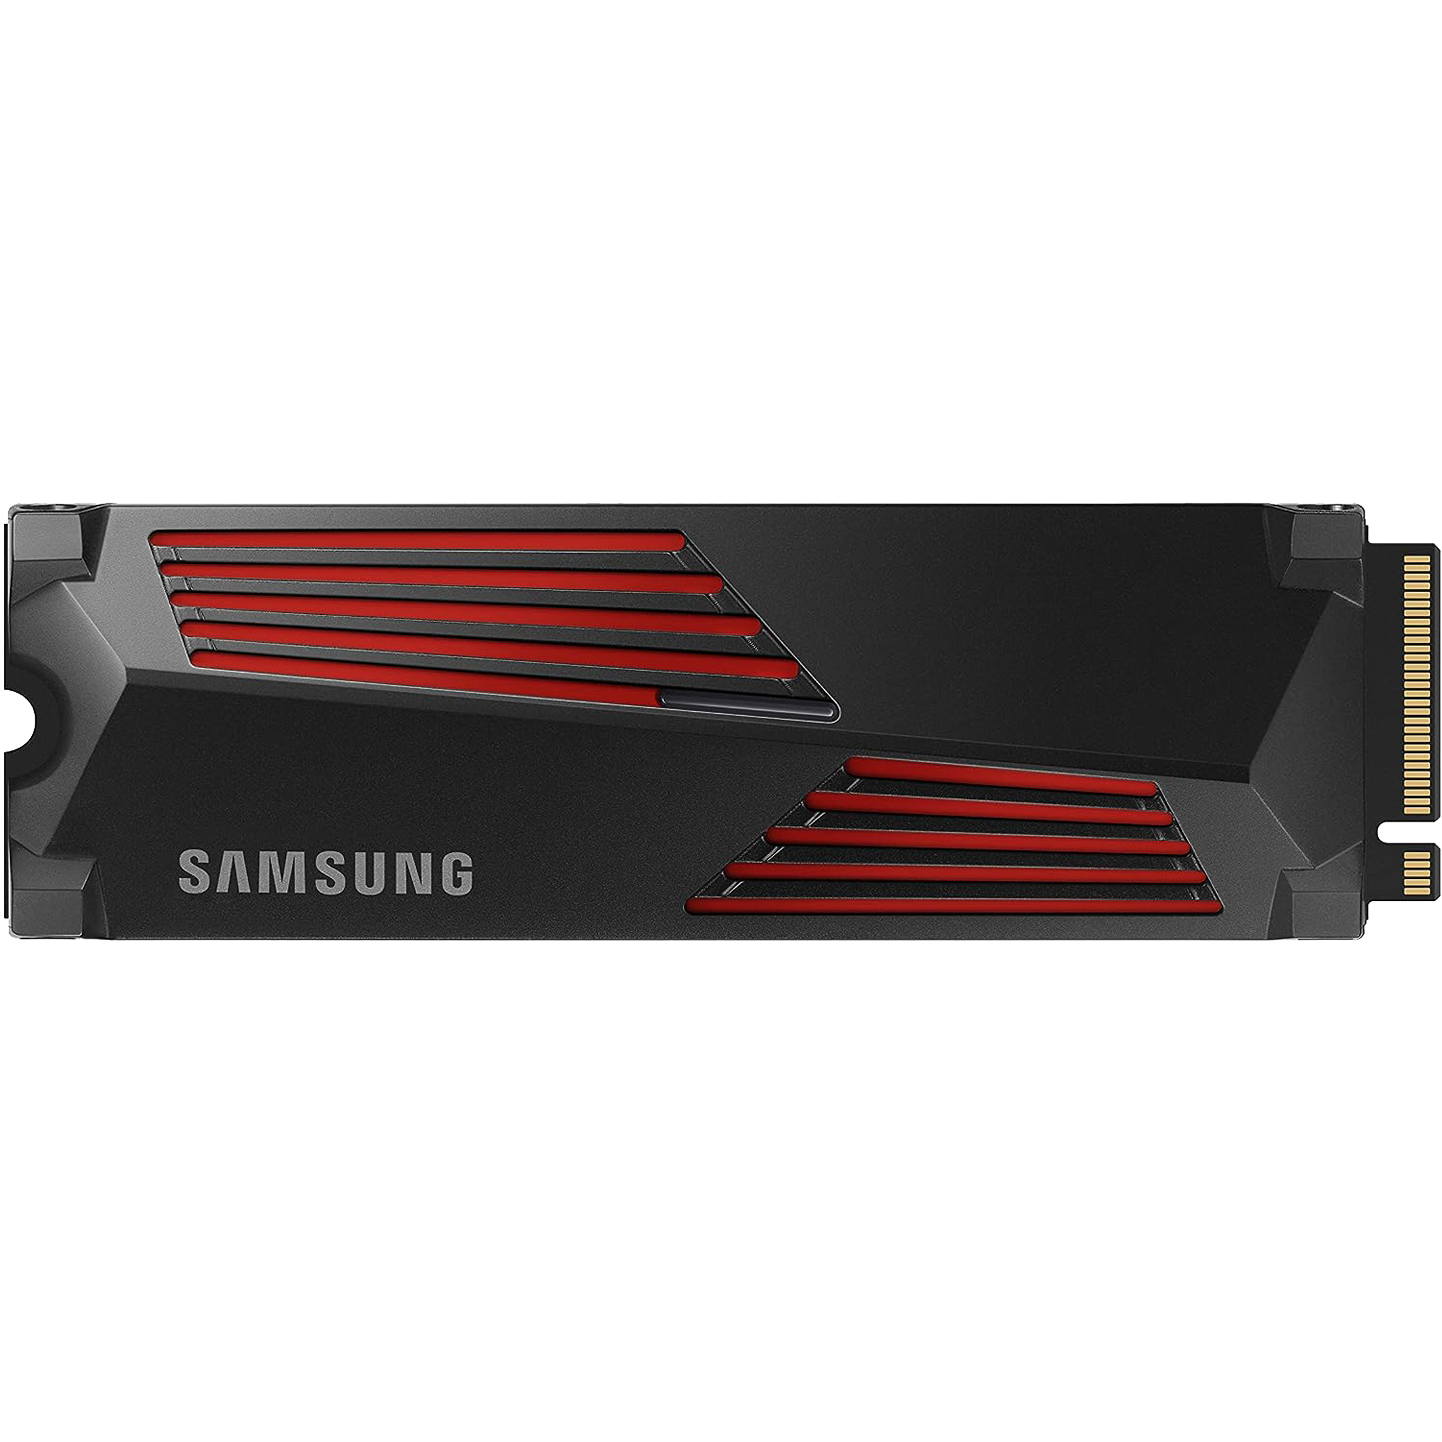 Best M.2 SSDs in 2024